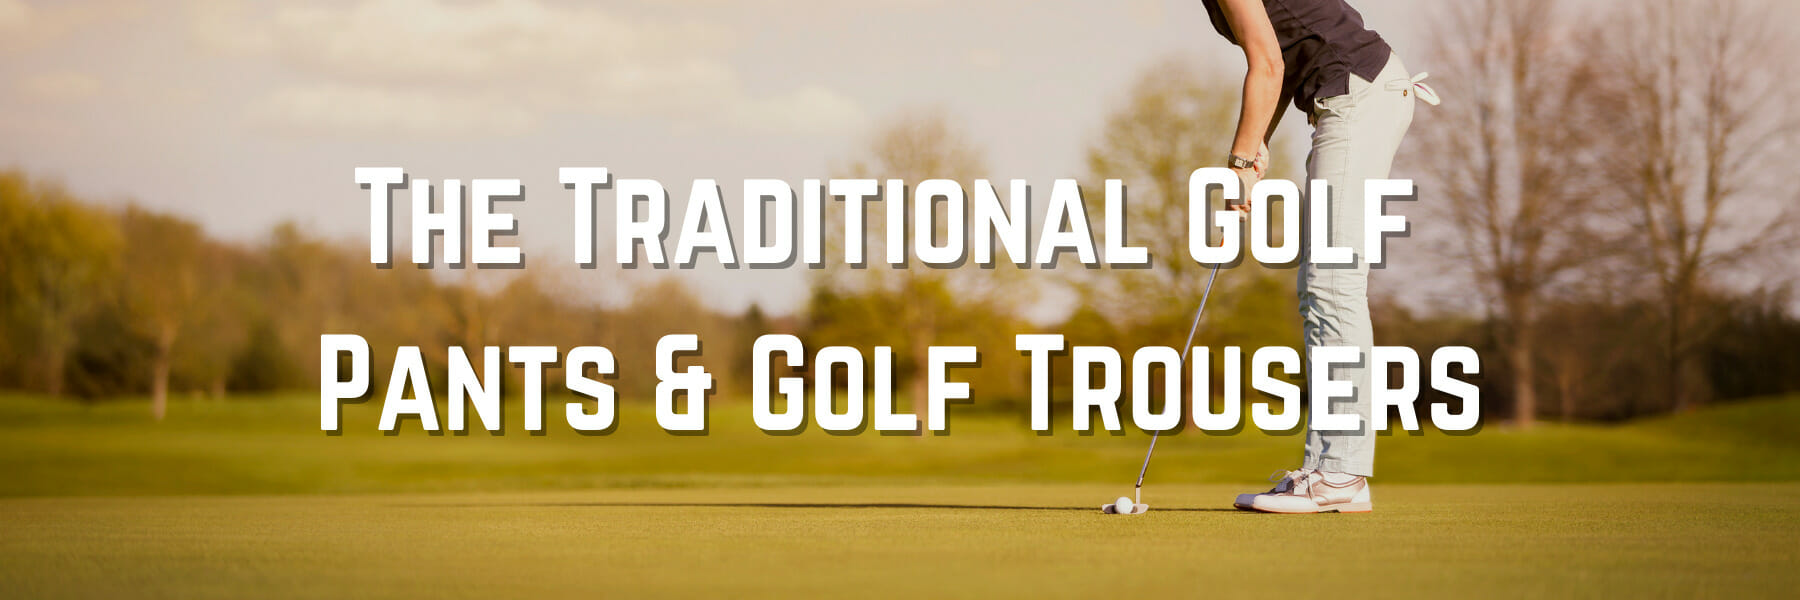 The Traditional Golf Pants & Golf Trousers